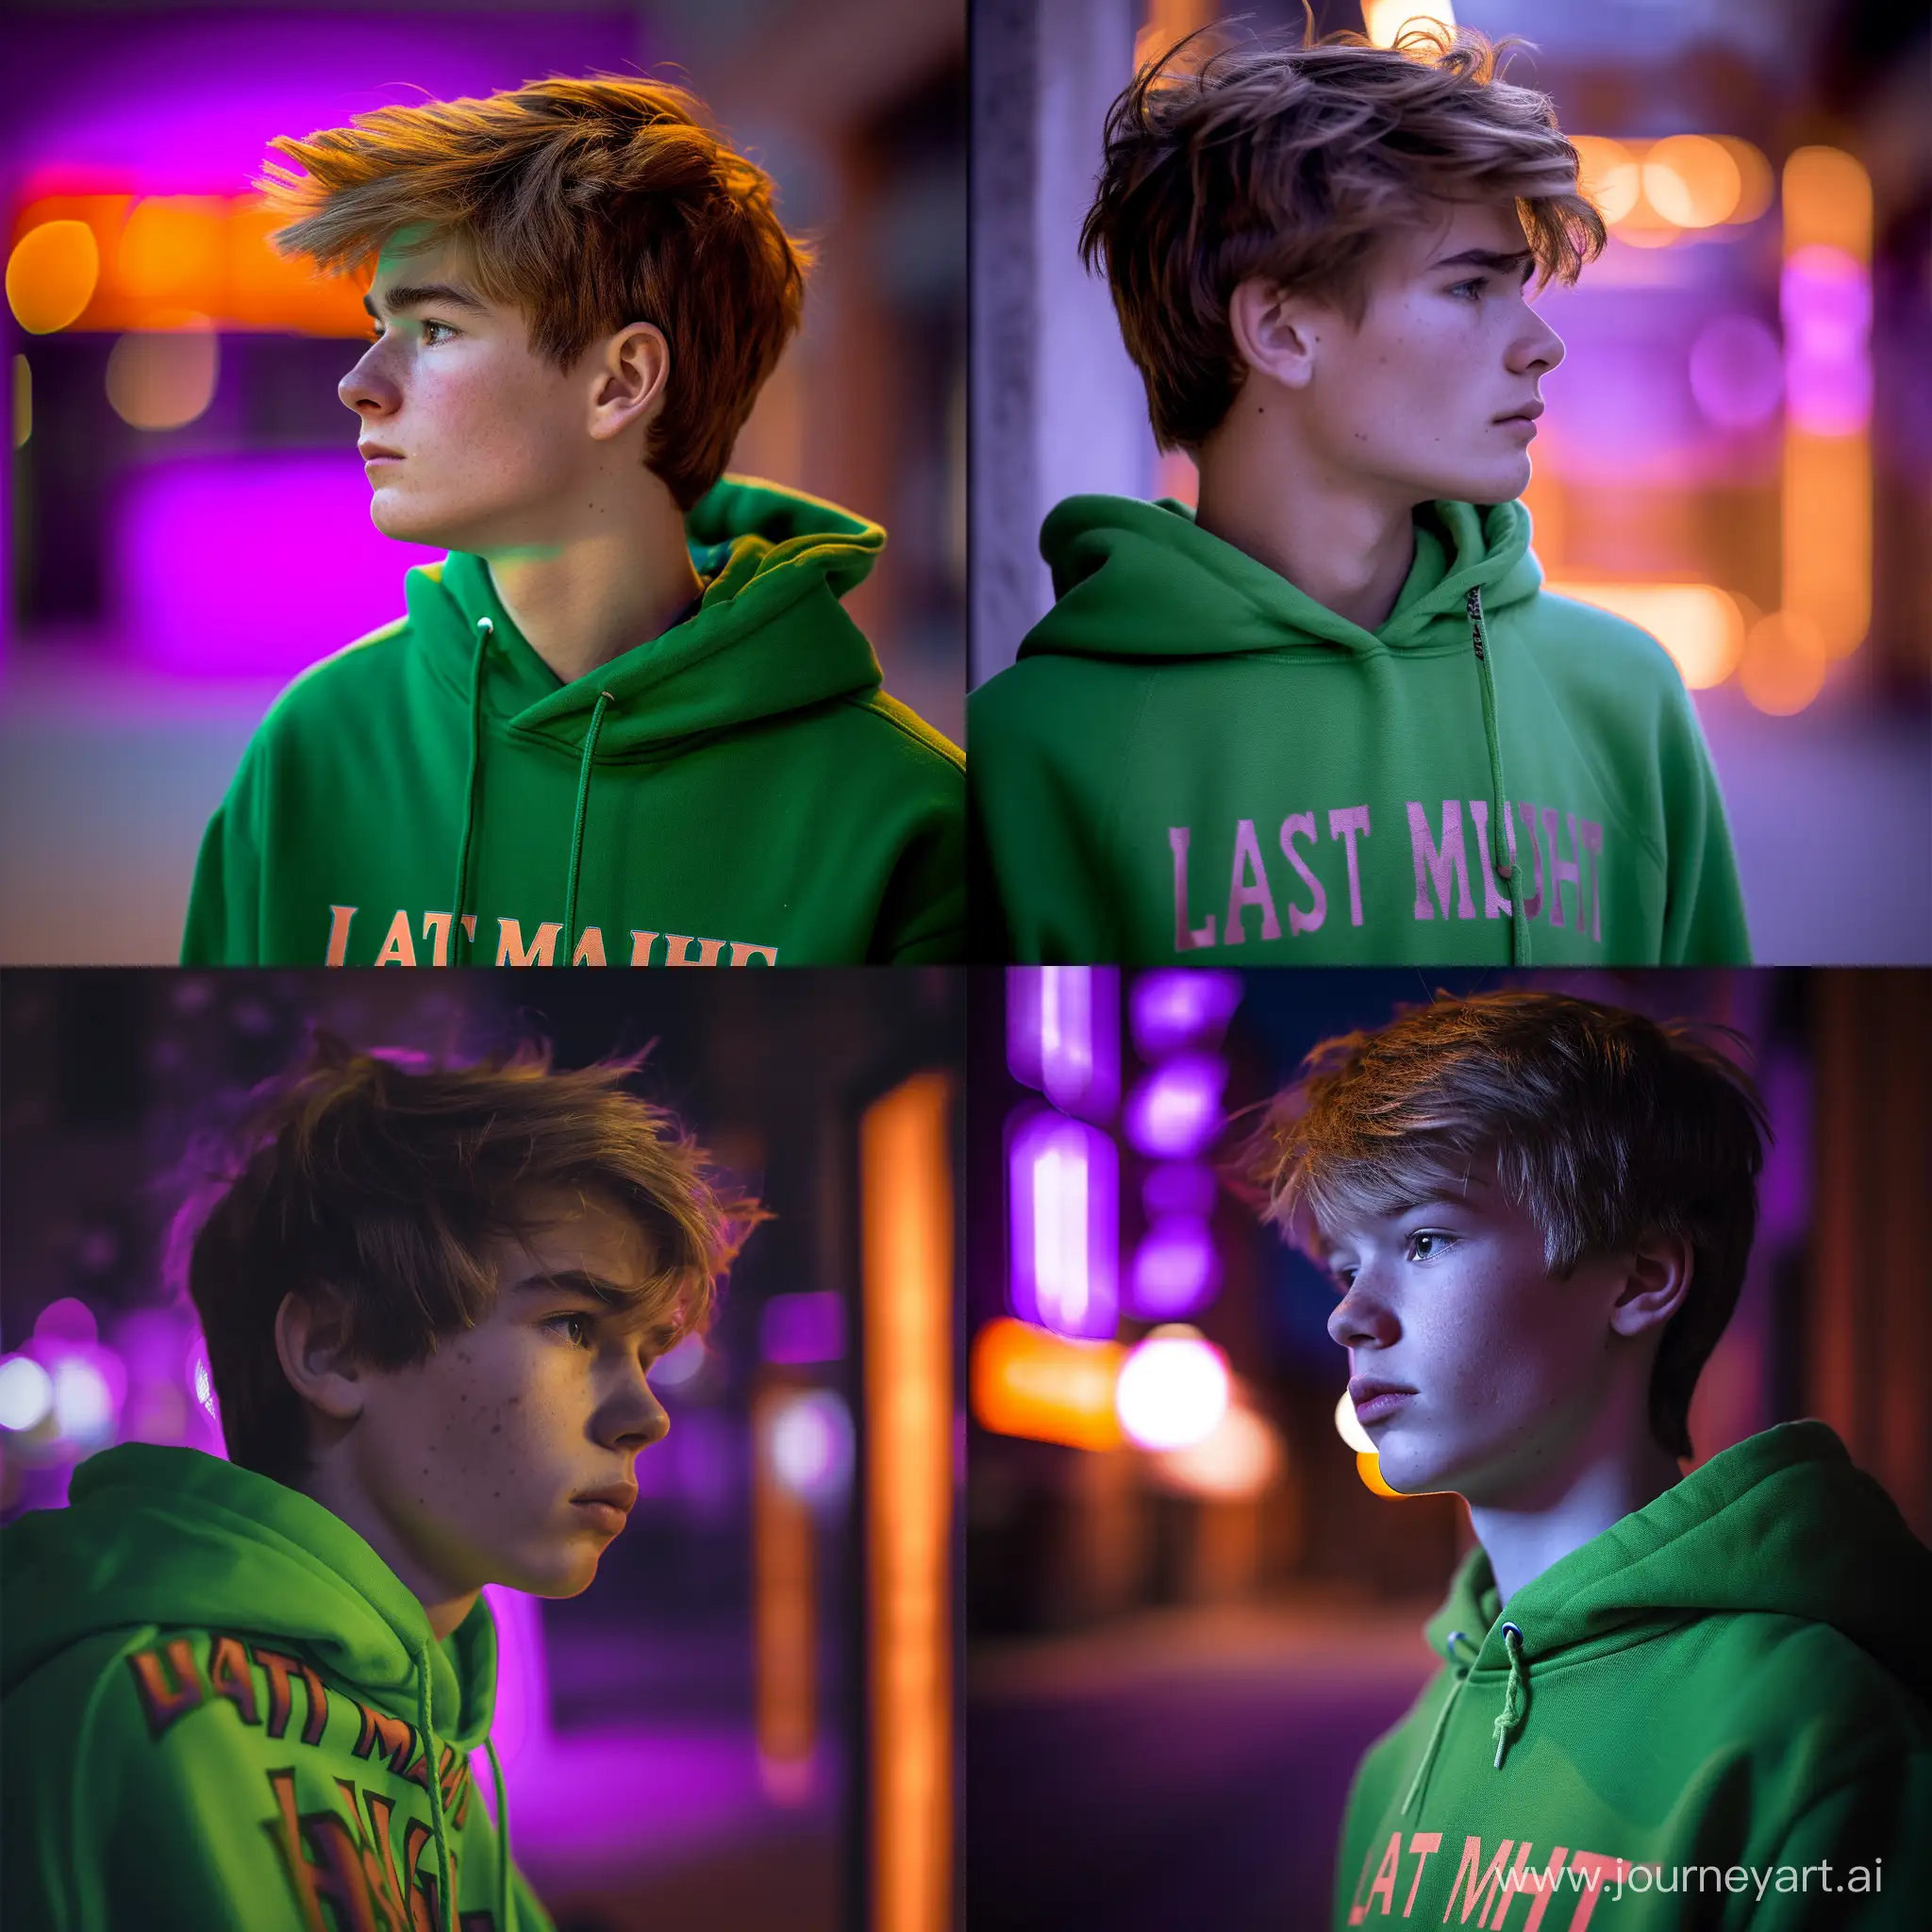 A teenager in a green hoodie with the words "LAST MATCH" looks to the side, his face illuminated by soft light. The background is blurred, with elements of purple and orange, creating the feeling of being in a neon-lit room. The expression on the face is thoughtful and concentrated. The teenager's hair color is light brown. The style of the image is reminiscent of modern urban photography with elements of low-light portraiture. The shooting angle is profile, the camera is focused on the face with a depth of field that blurs the background, the lighting is soft, lateral, and the resolution is high.